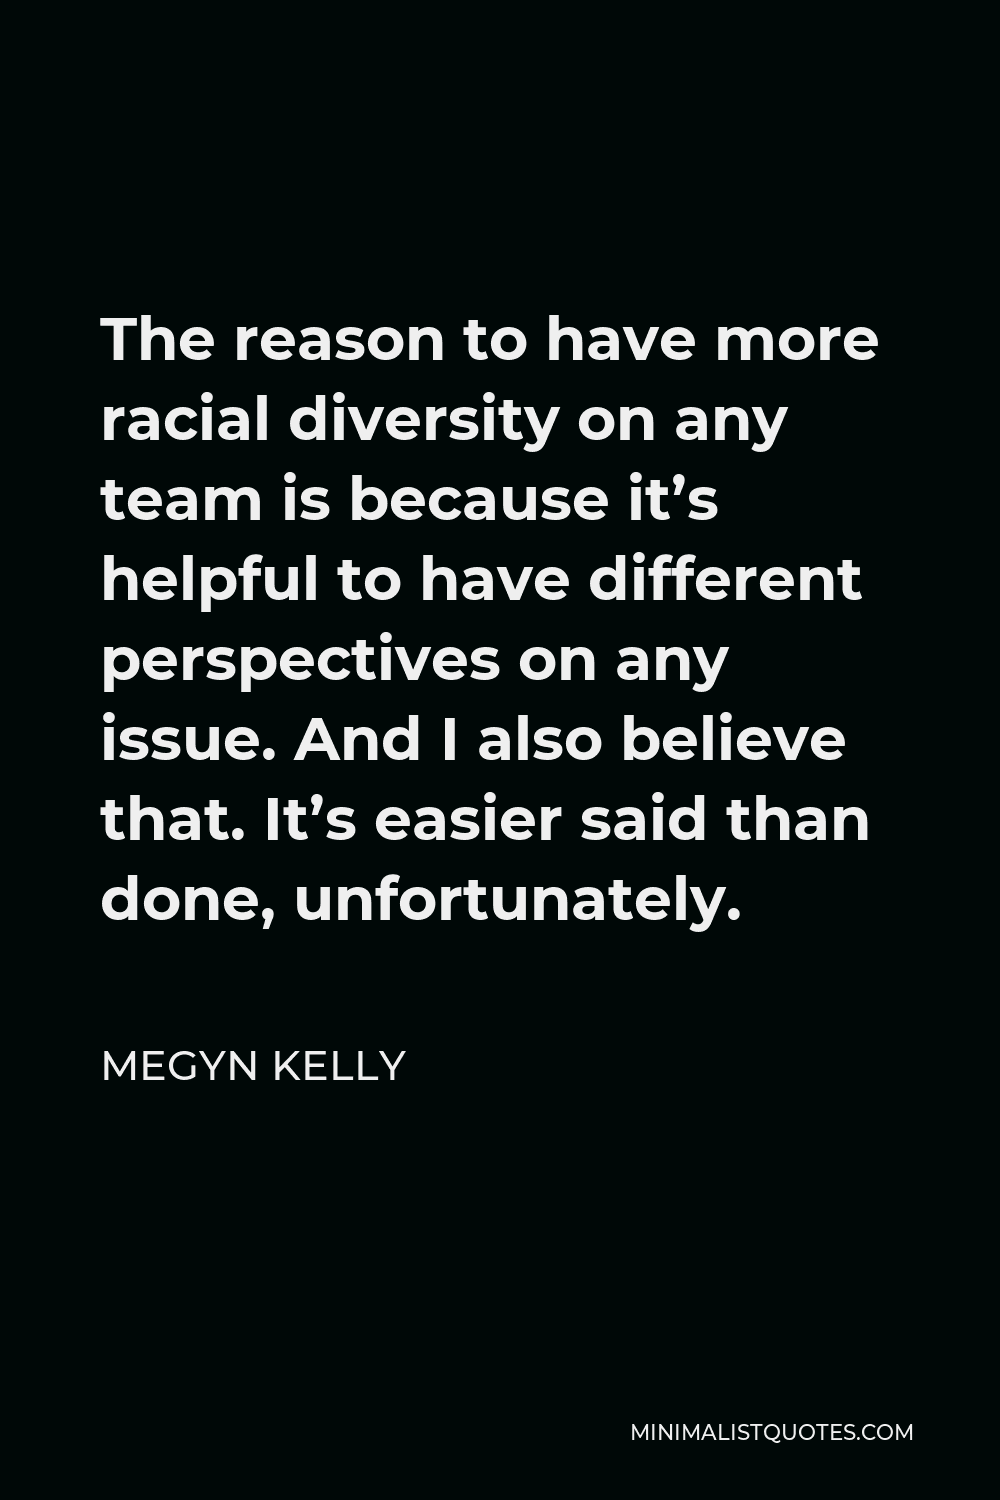 Megyn Kelly Quote - The reason to have more racial diversity on any team is because it’s helpful to have different perspectives on any issue. And I also believe that. It’s easier said than done, unfortunately.